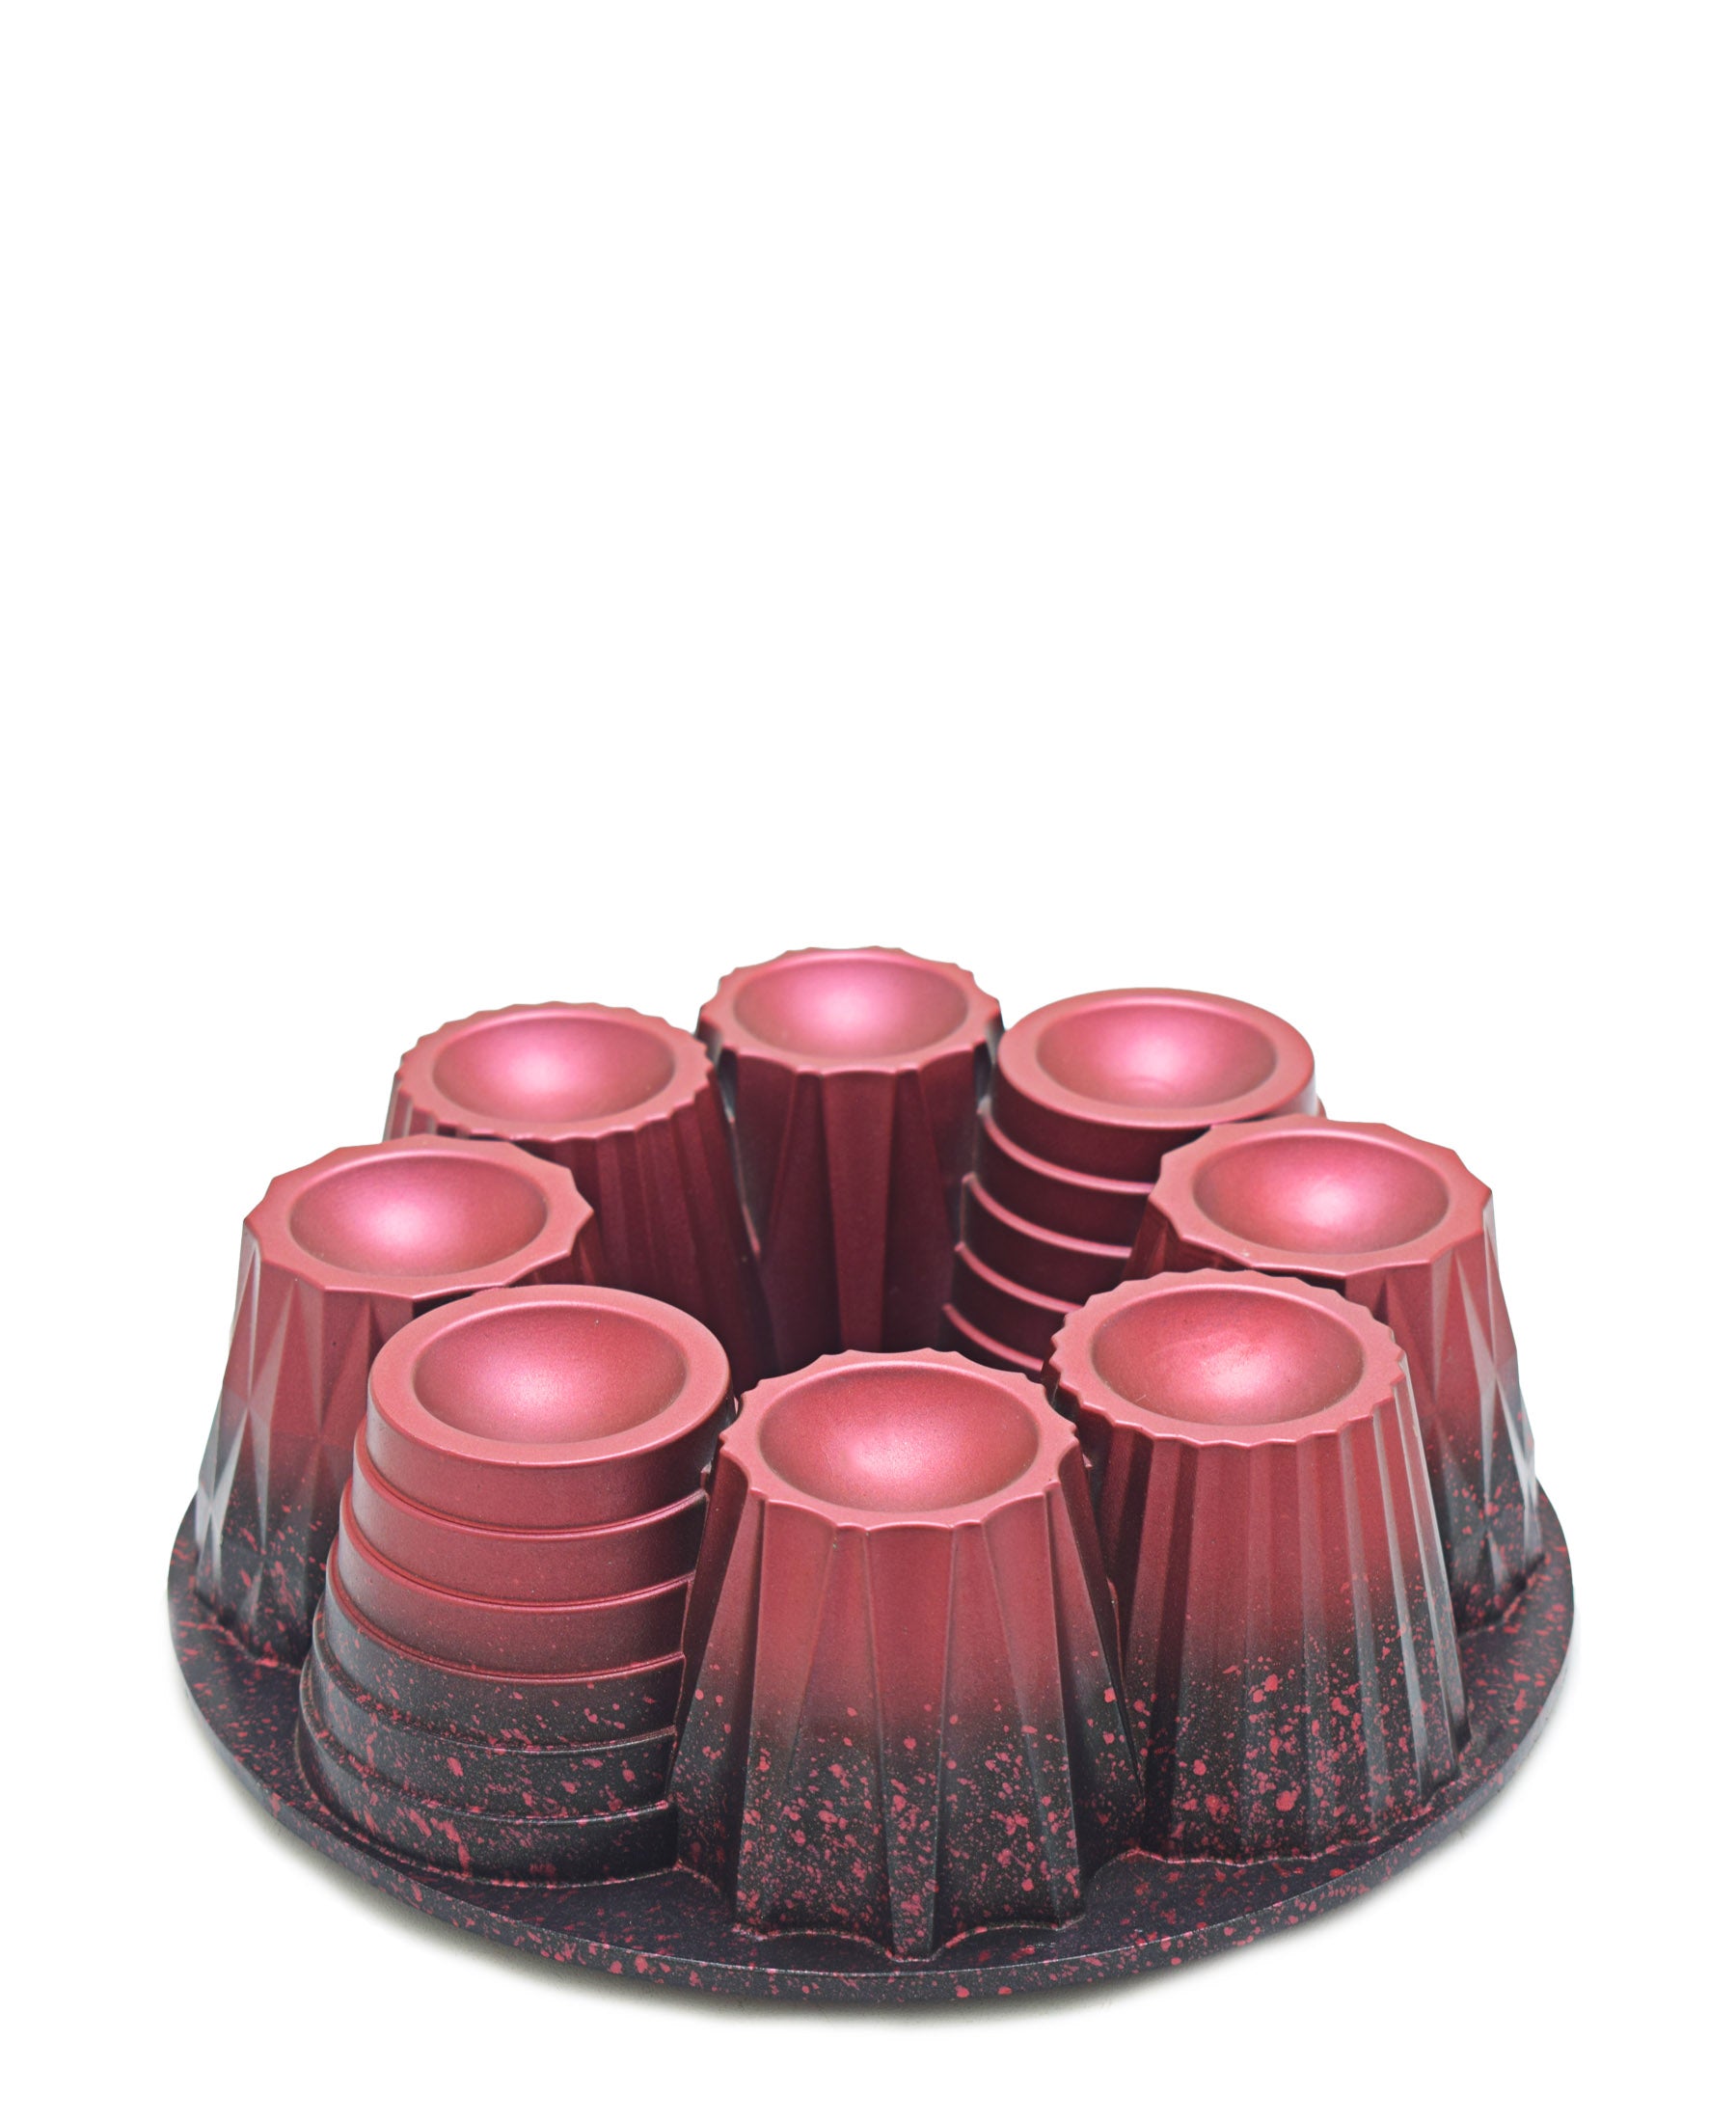 OMS Granite Muffin & Cup Cake Mould - Red